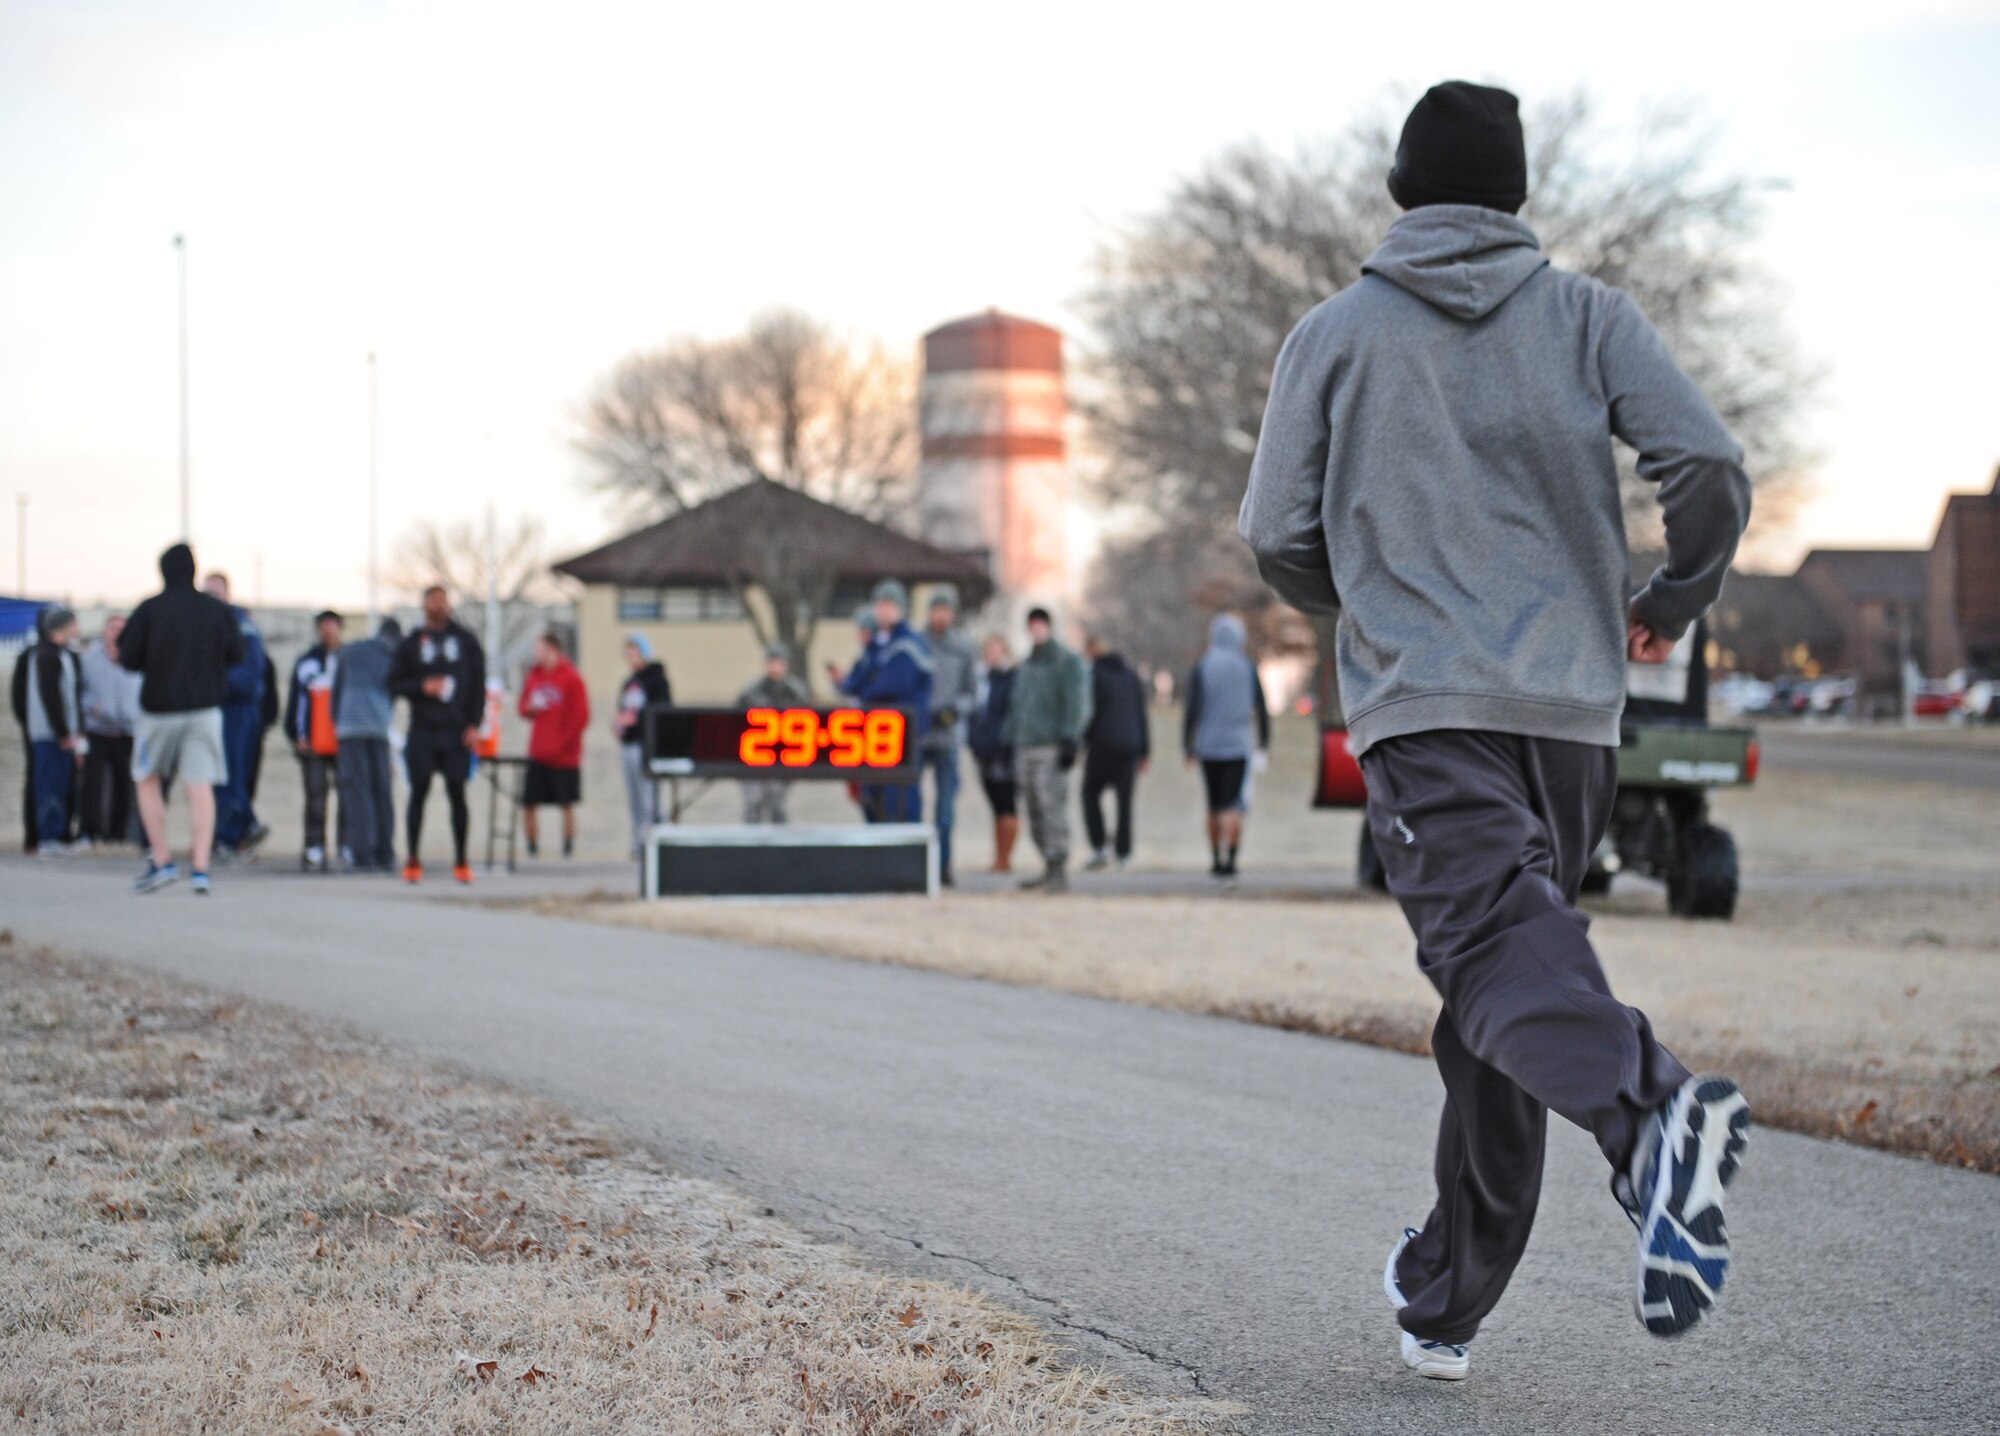 A member of Team Whiteman races to the finish line during the Resolution 5k run at Whiteman Air Force Base, Mo., Jan. 29, 2016. The Whiteman 5k is sponsored monthly by the Whiteman Tier II and gives base residents an opportunity to come together as a community, promoting health and fitness. (U.S. Air Force photo by Tech. Sgt. Miguel Lara III)